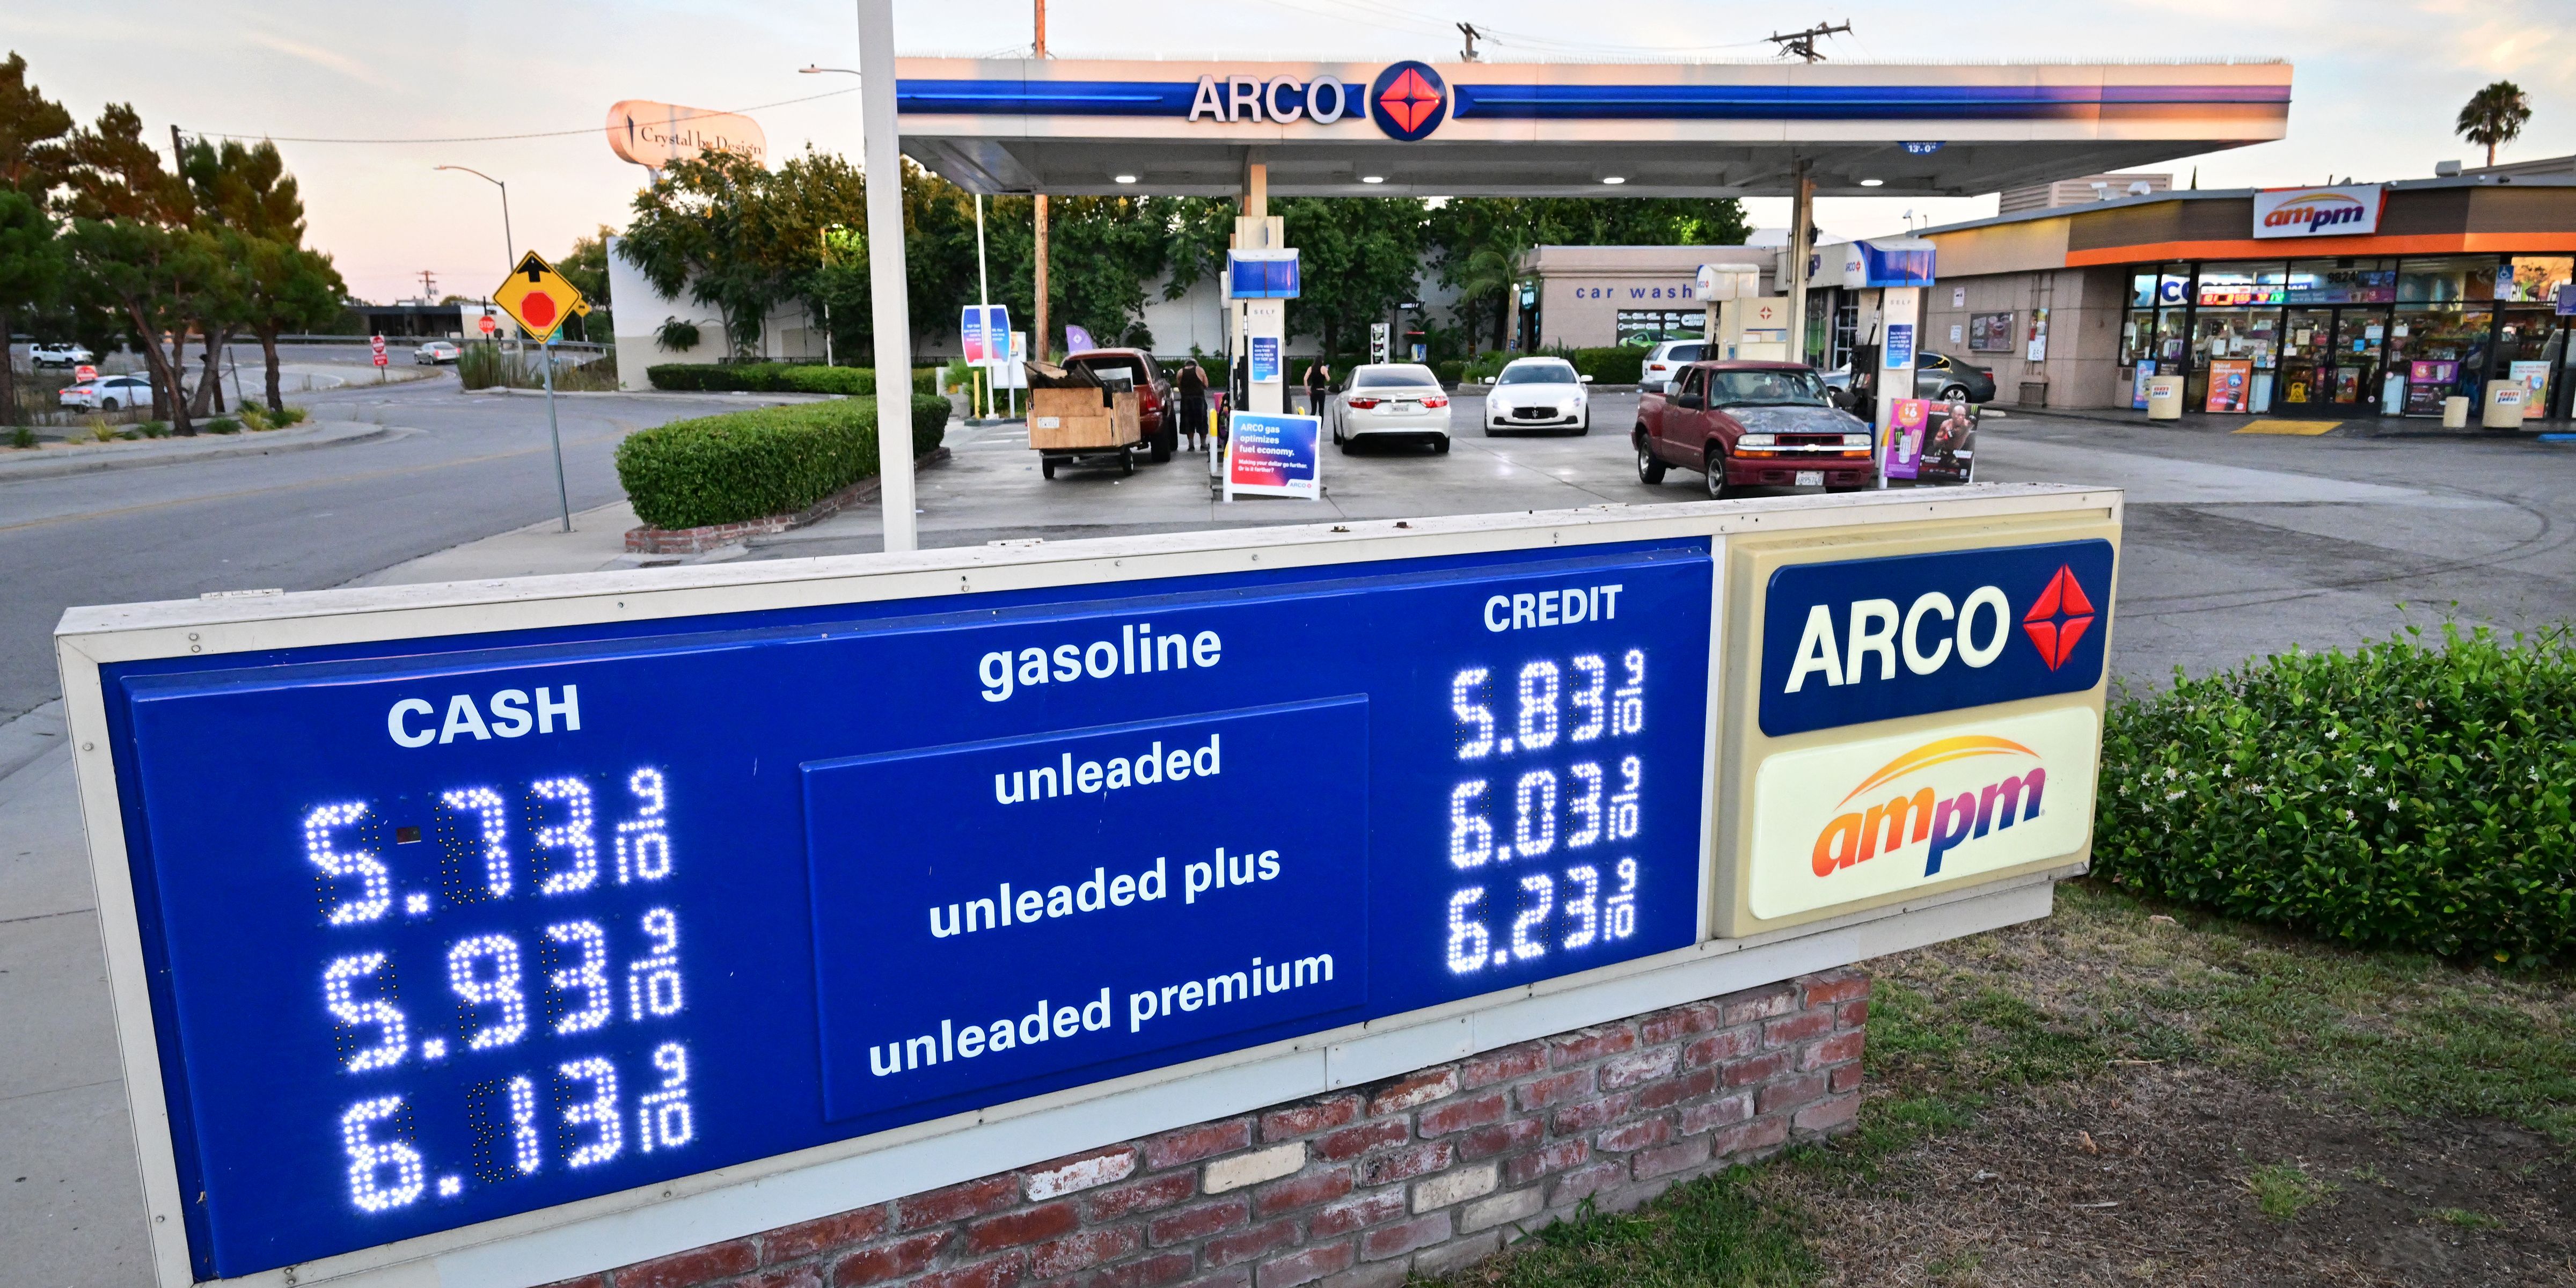 Americans Are Driving Less Due to High Gas Prices